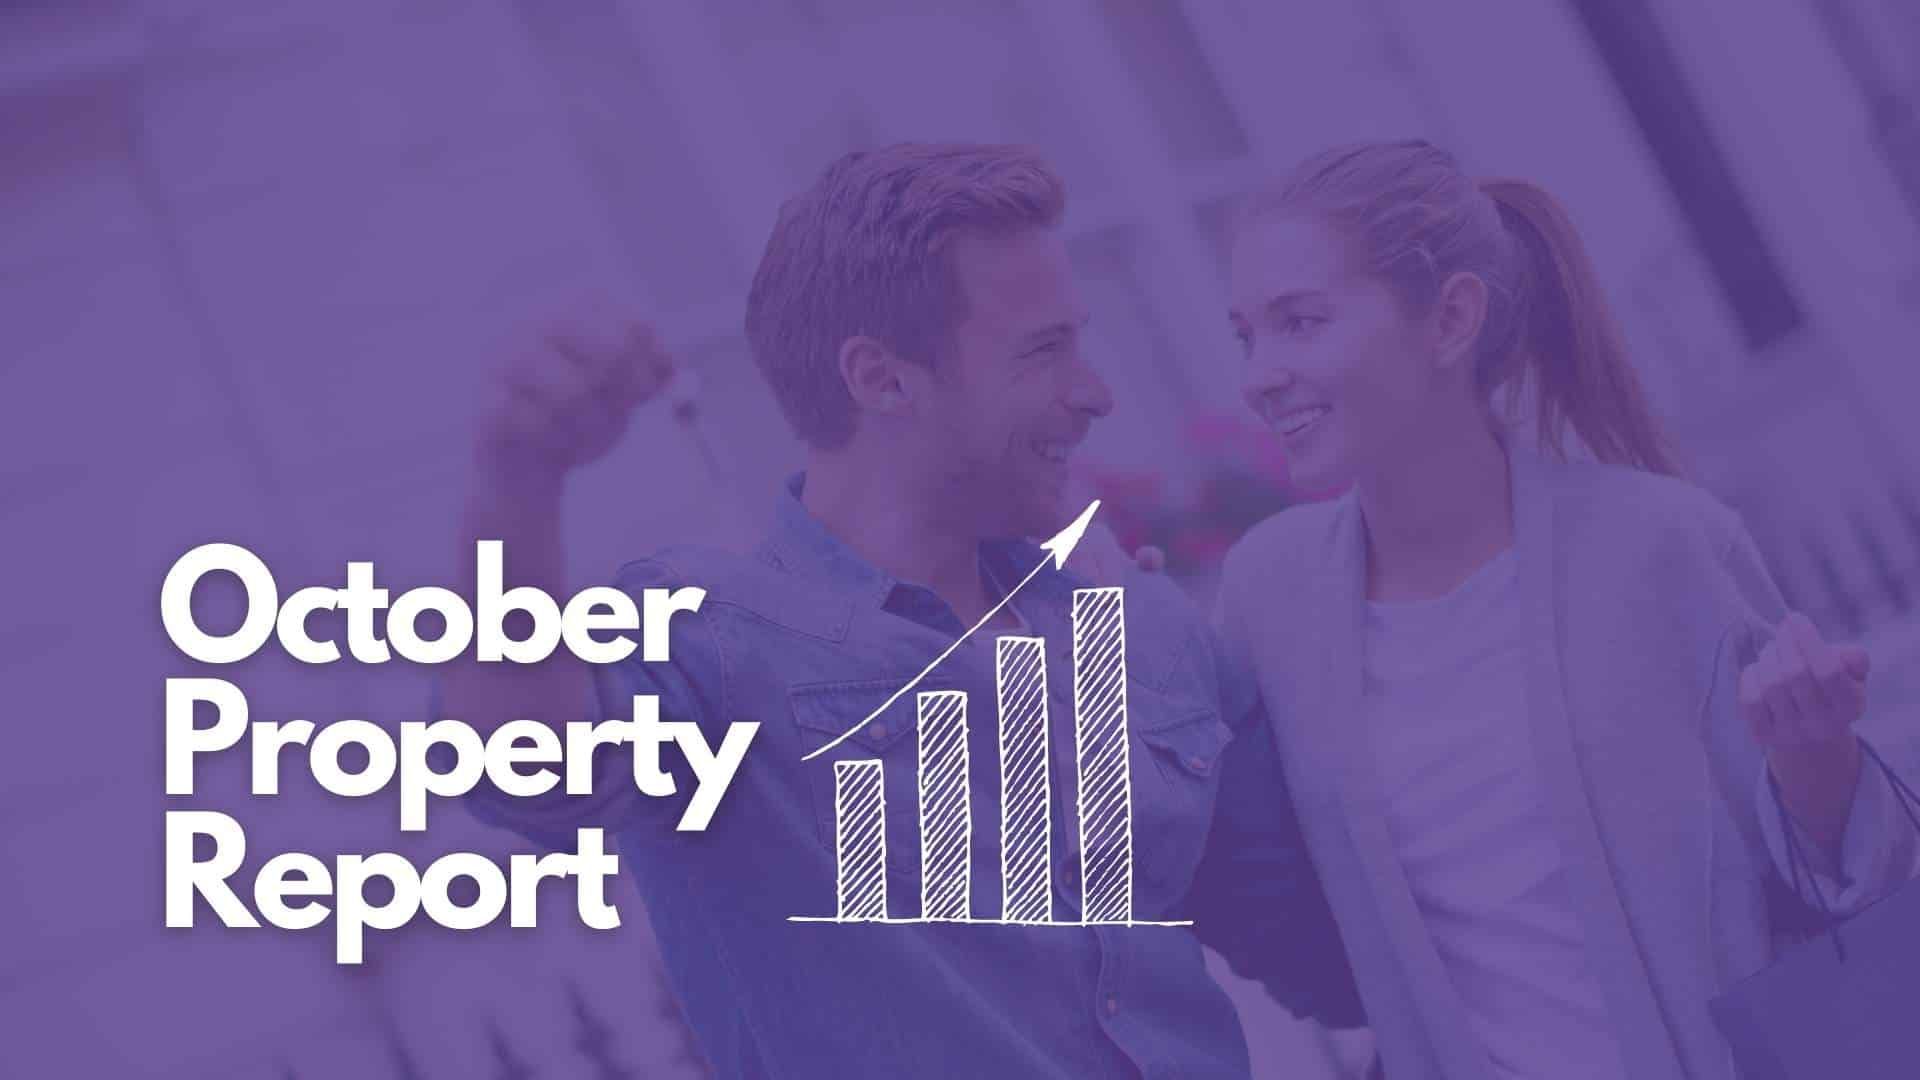 Latest: October’s property market report